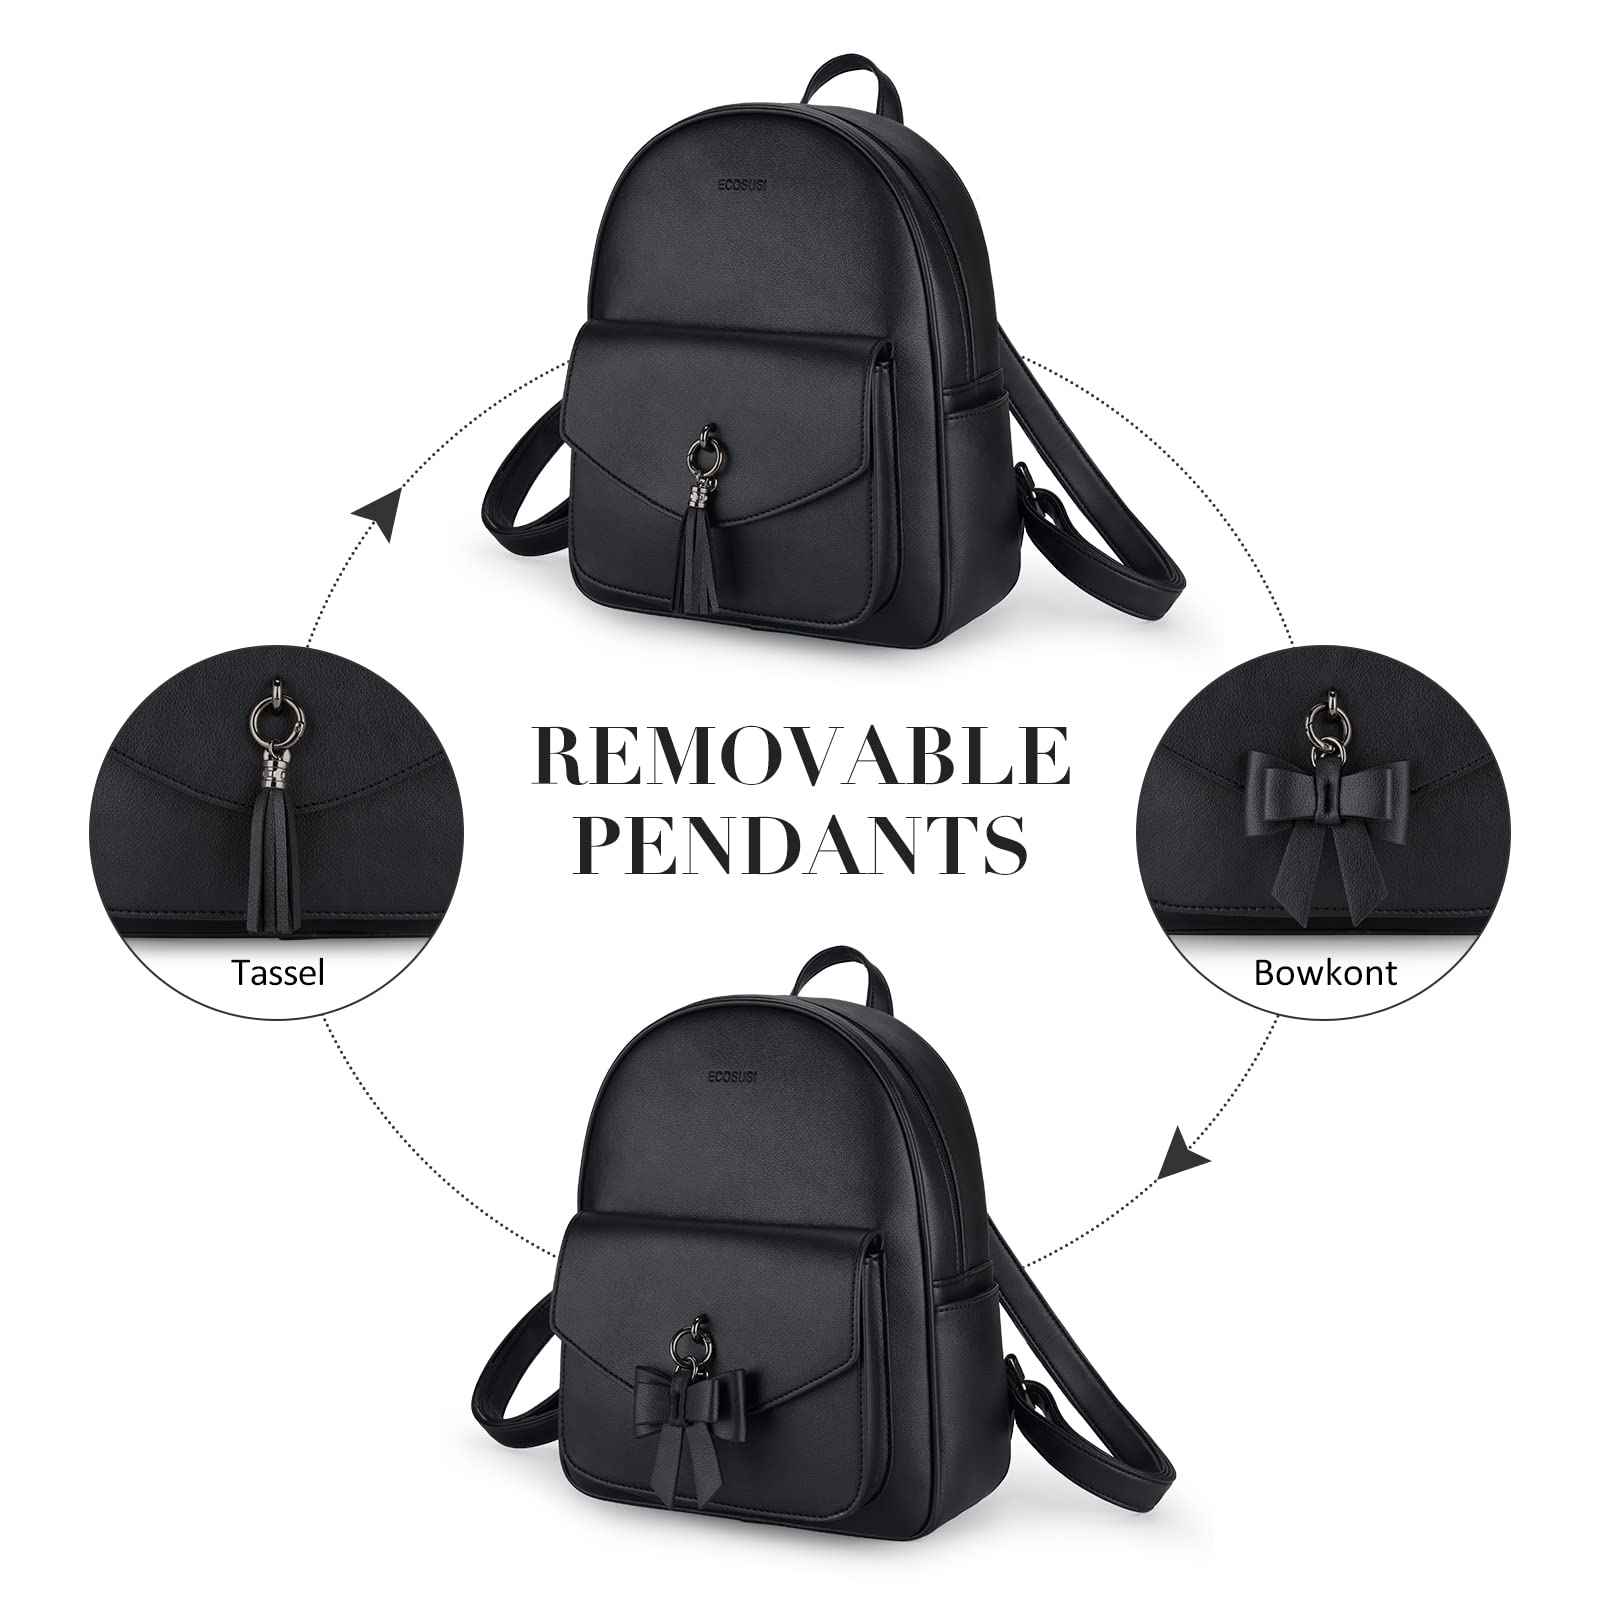 ECOSUSI Women Backpack Purse Water Resistant PU Leather Backpack Fashion Rucksack Ladies College Daypack with Tassel,3 Pcs